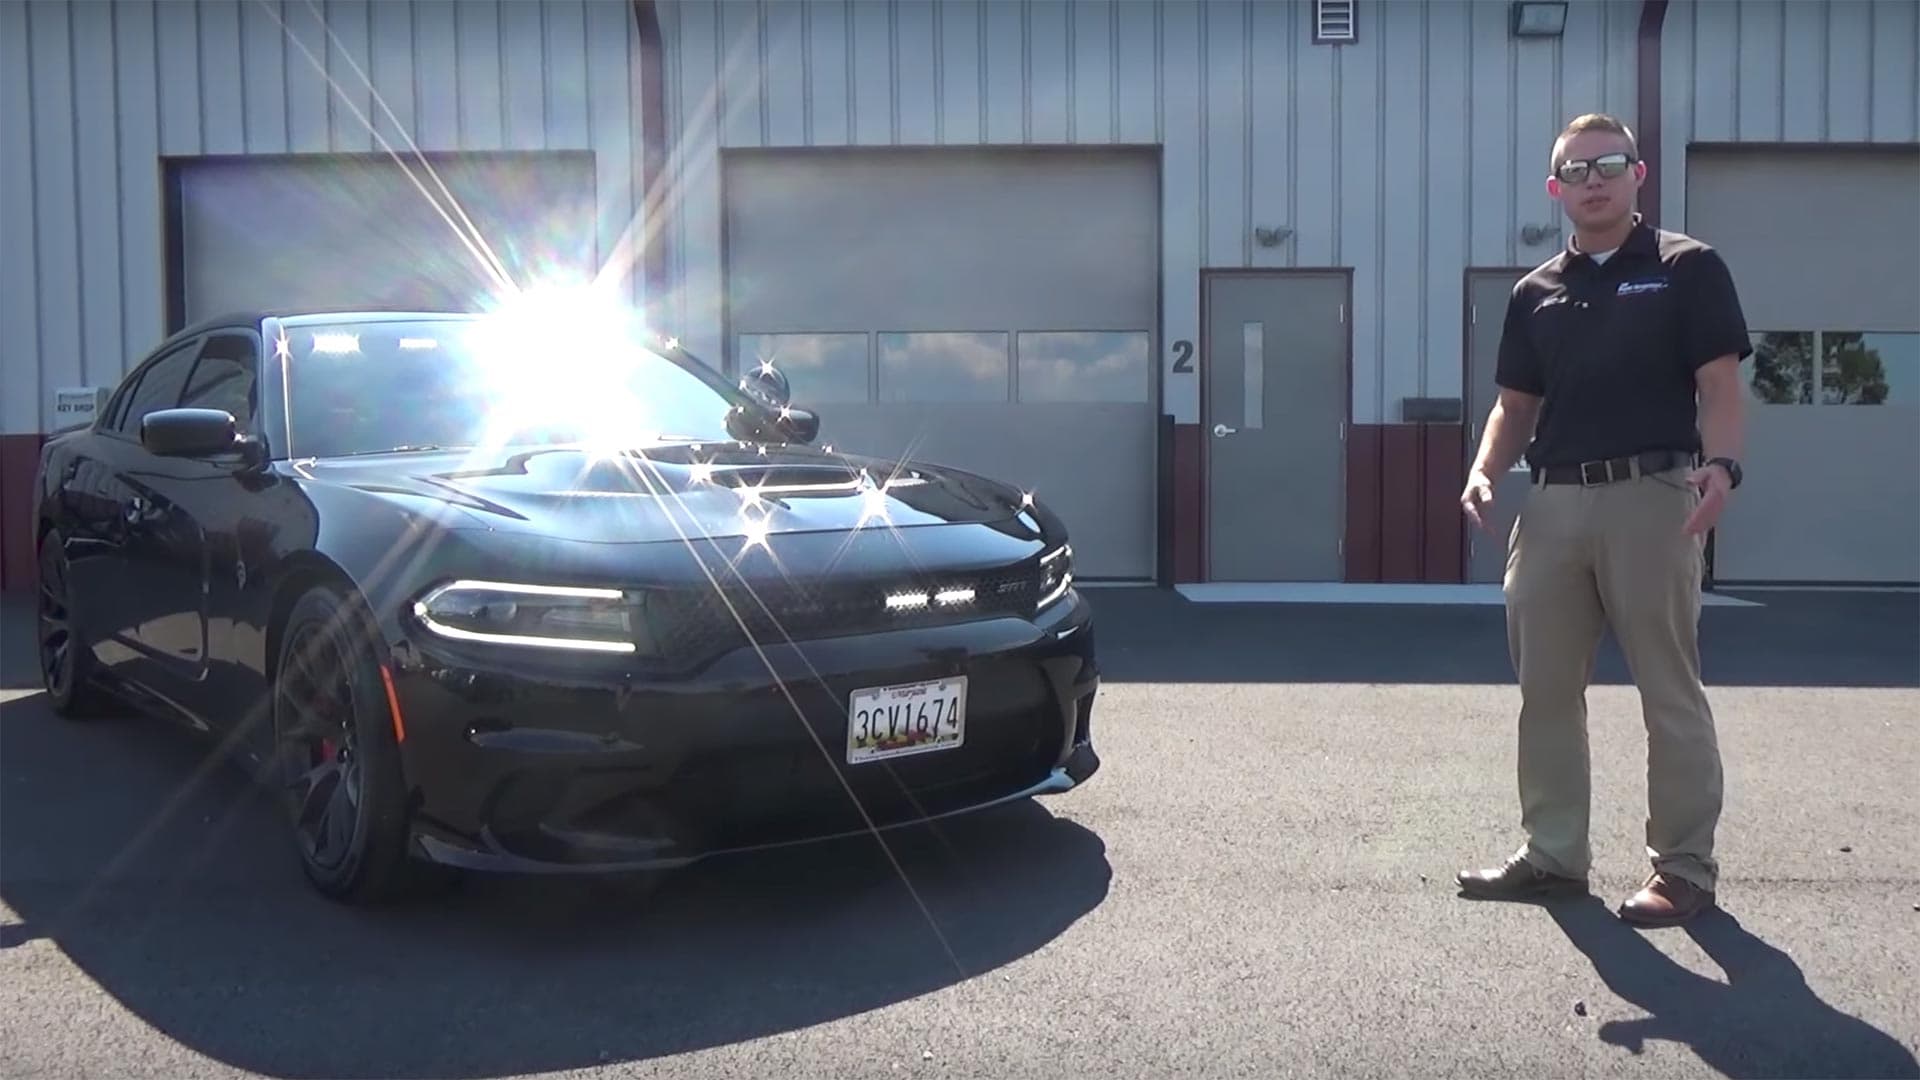 Check Out This Insane Dodge Charger Hellcat Emergency Vehicle